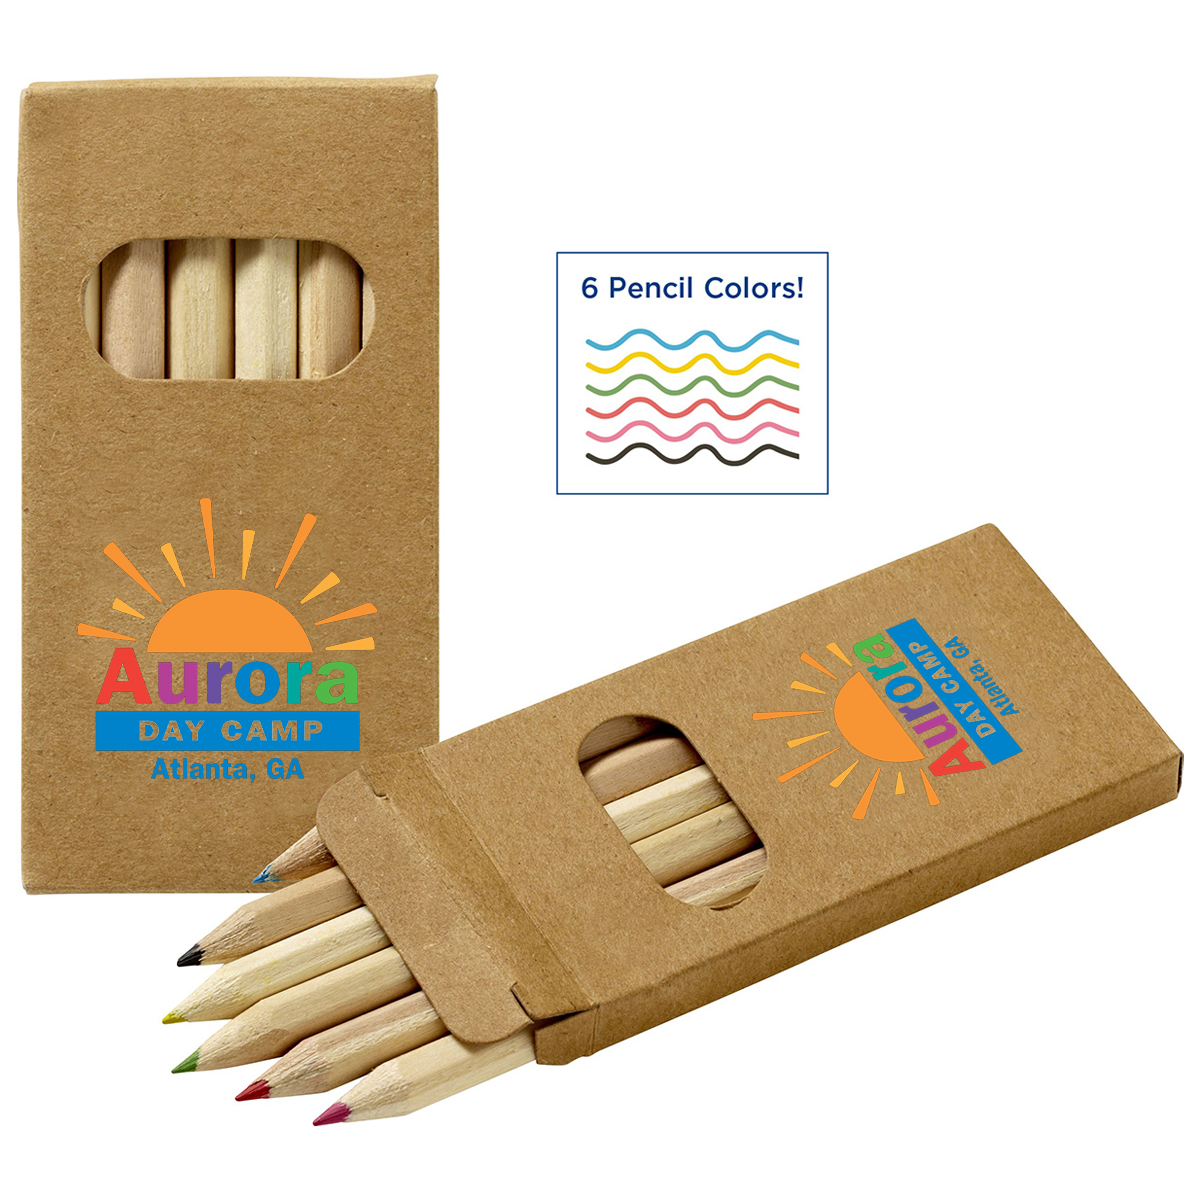 recycled colored pencil set with full color logo